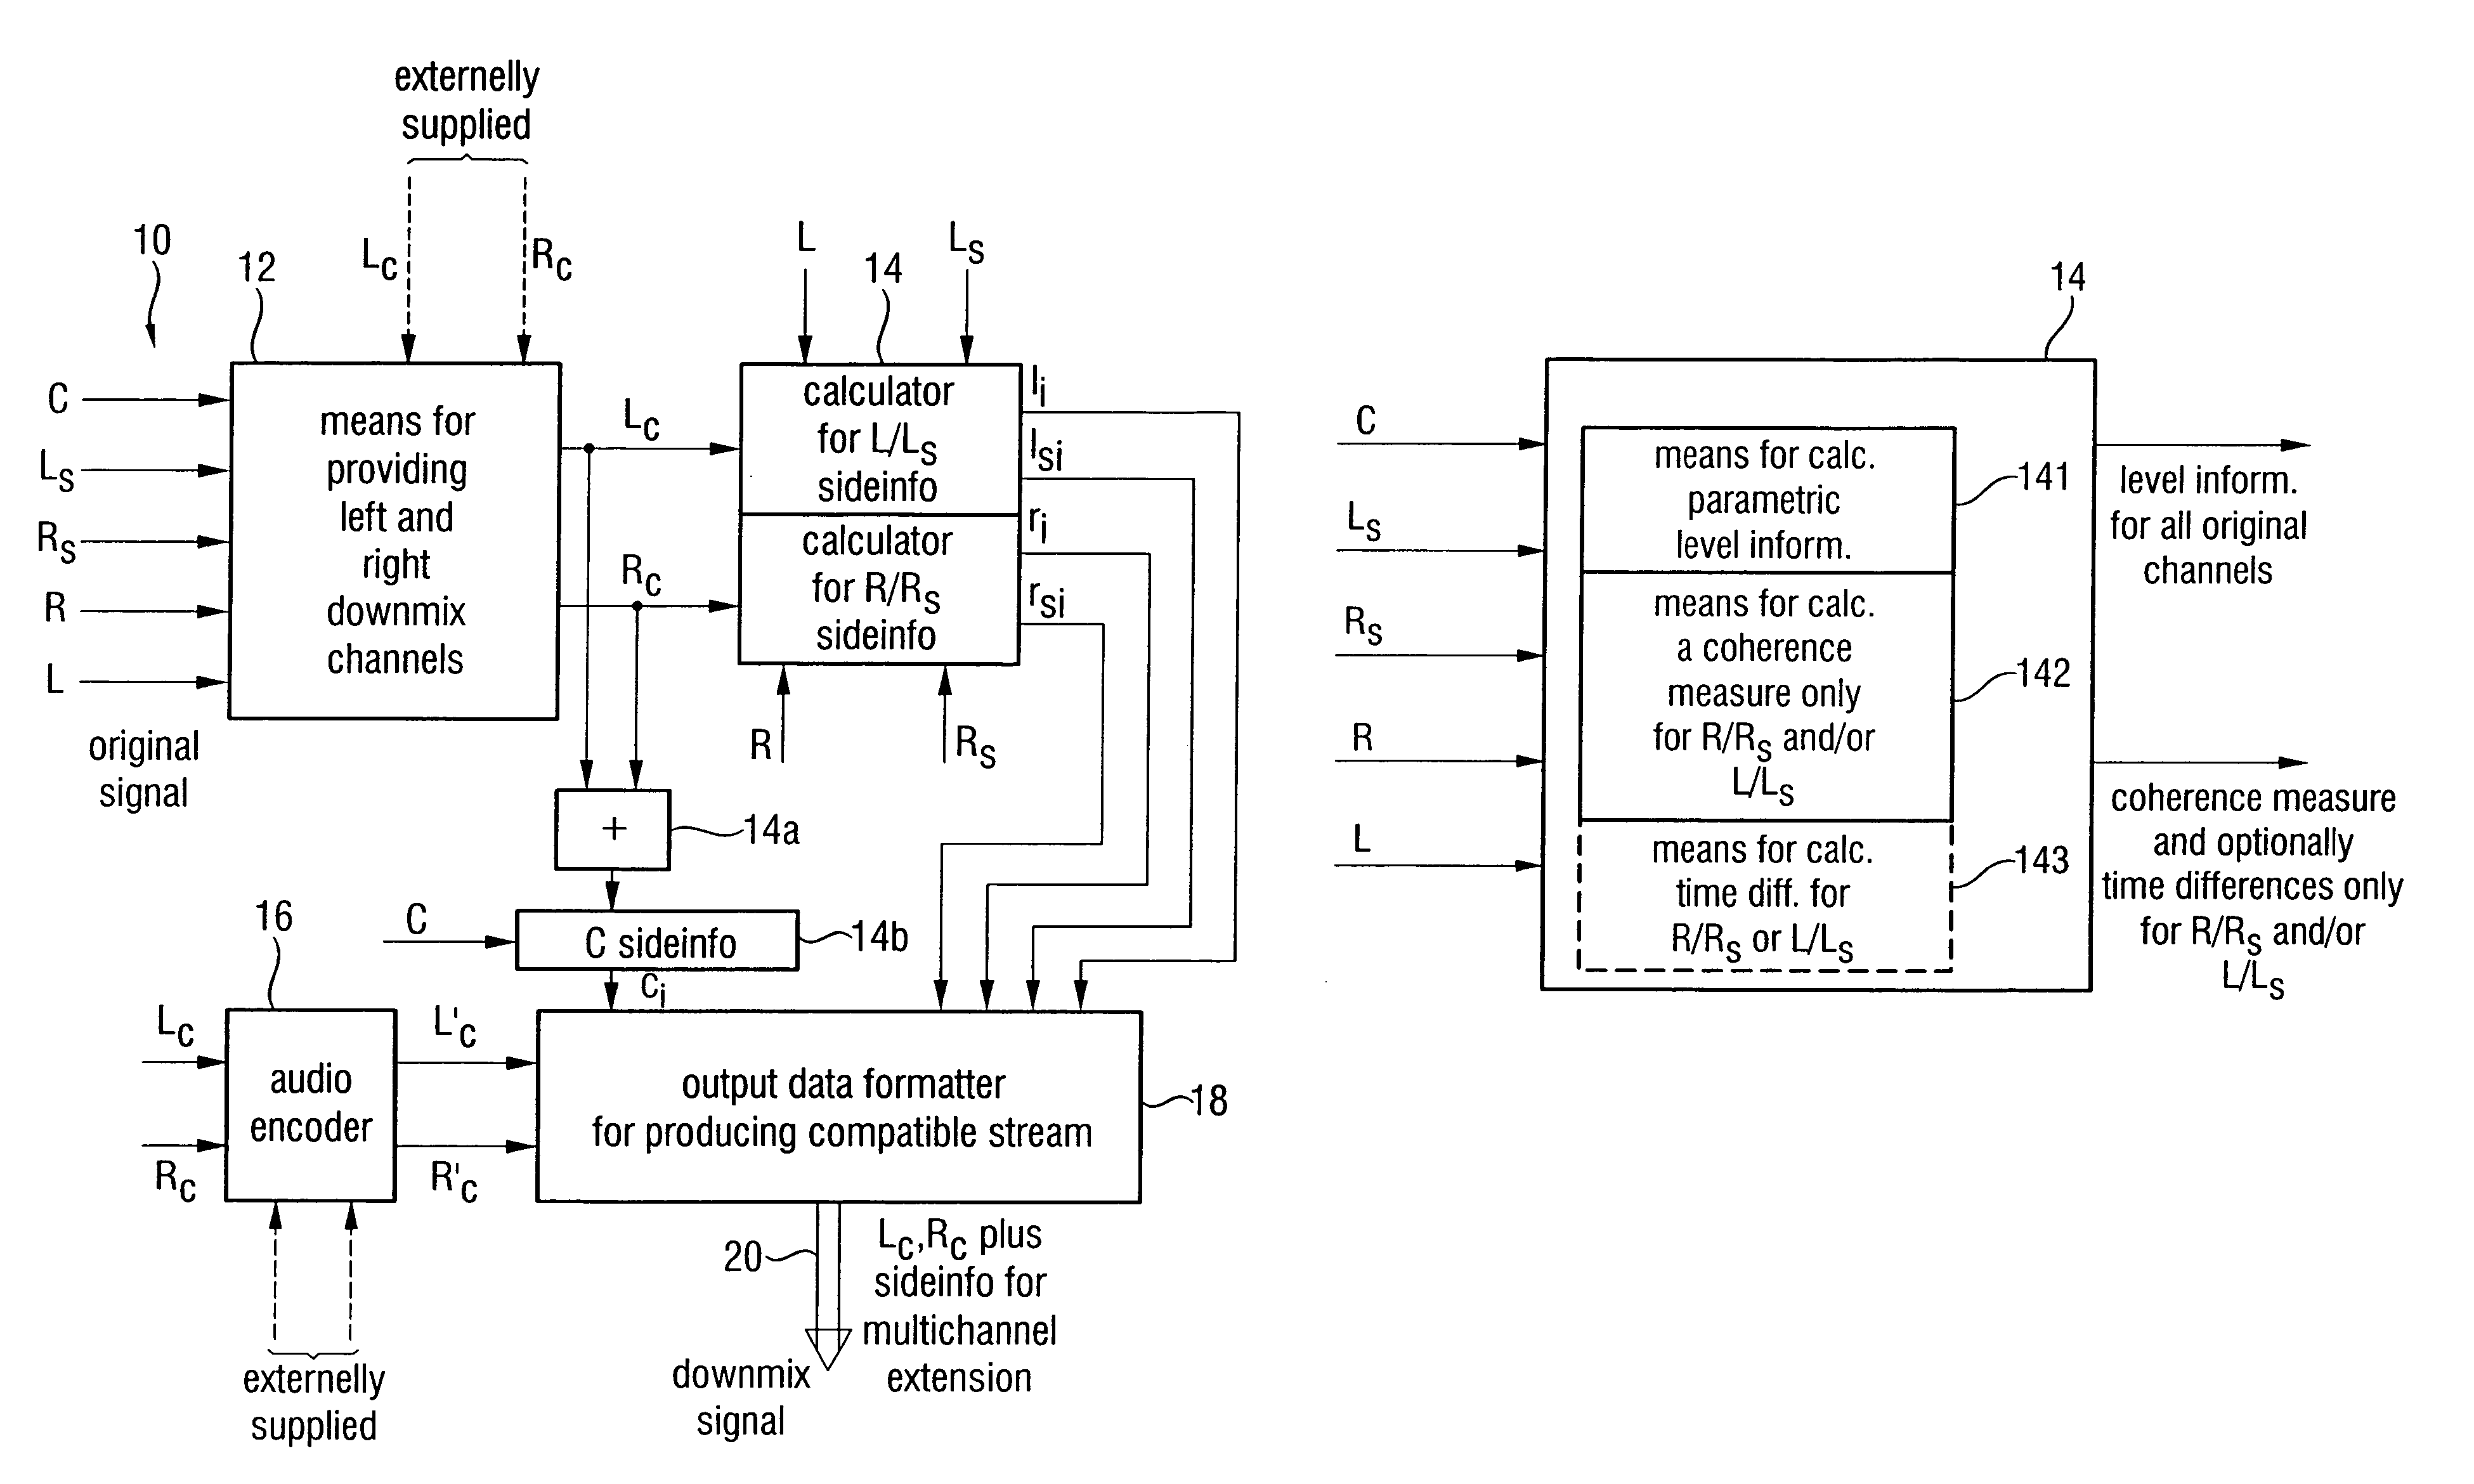 Apparatus and method for constructing a multi-channel output signal or for generating a downmix signal